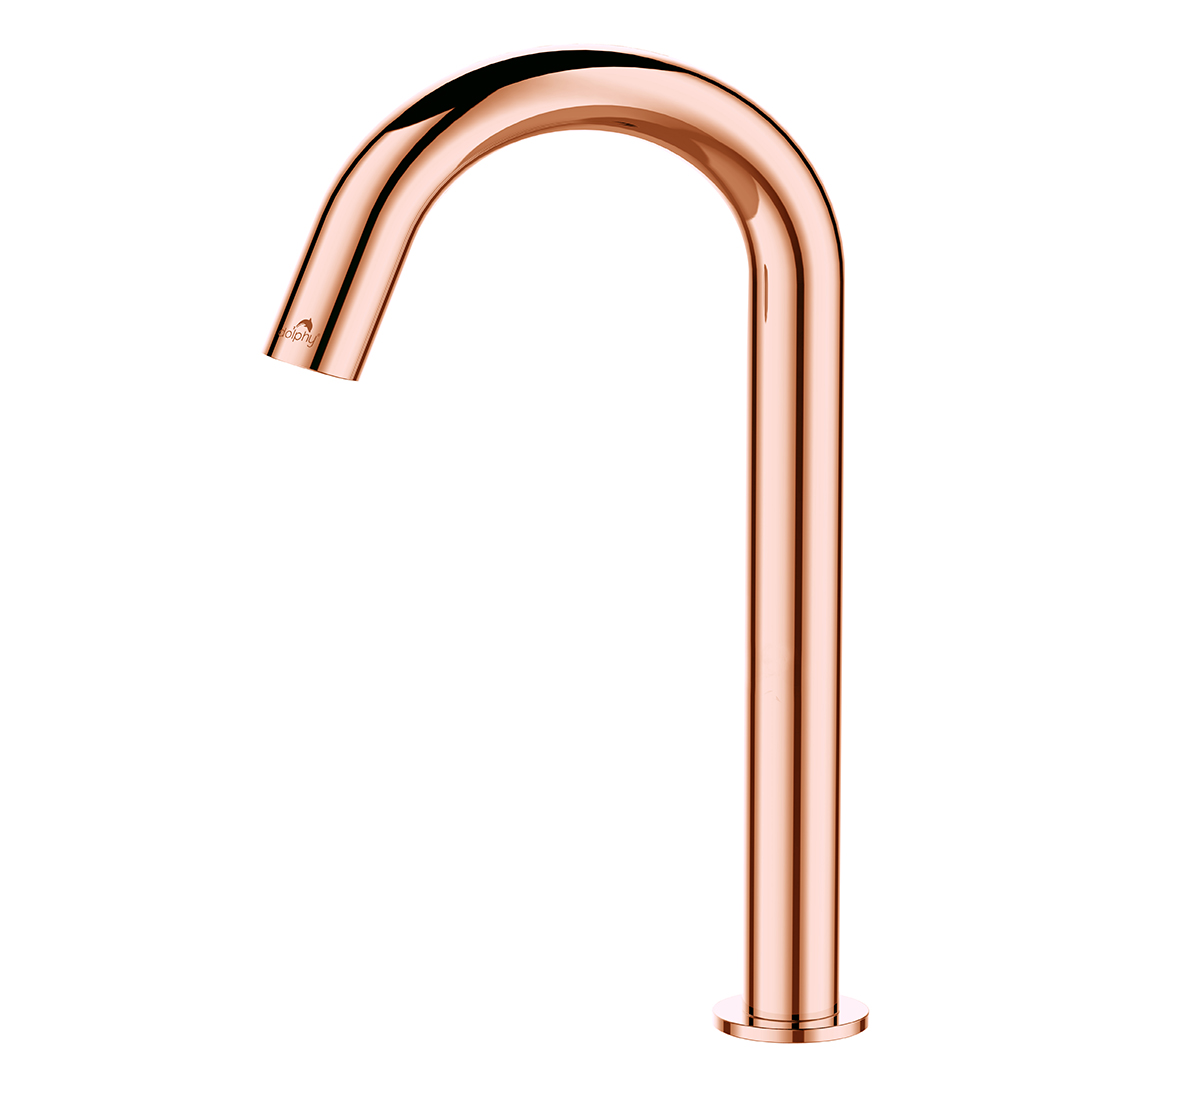 Chrome Plated Electrical Rose Gold Deck Mounted Sensor Tap
